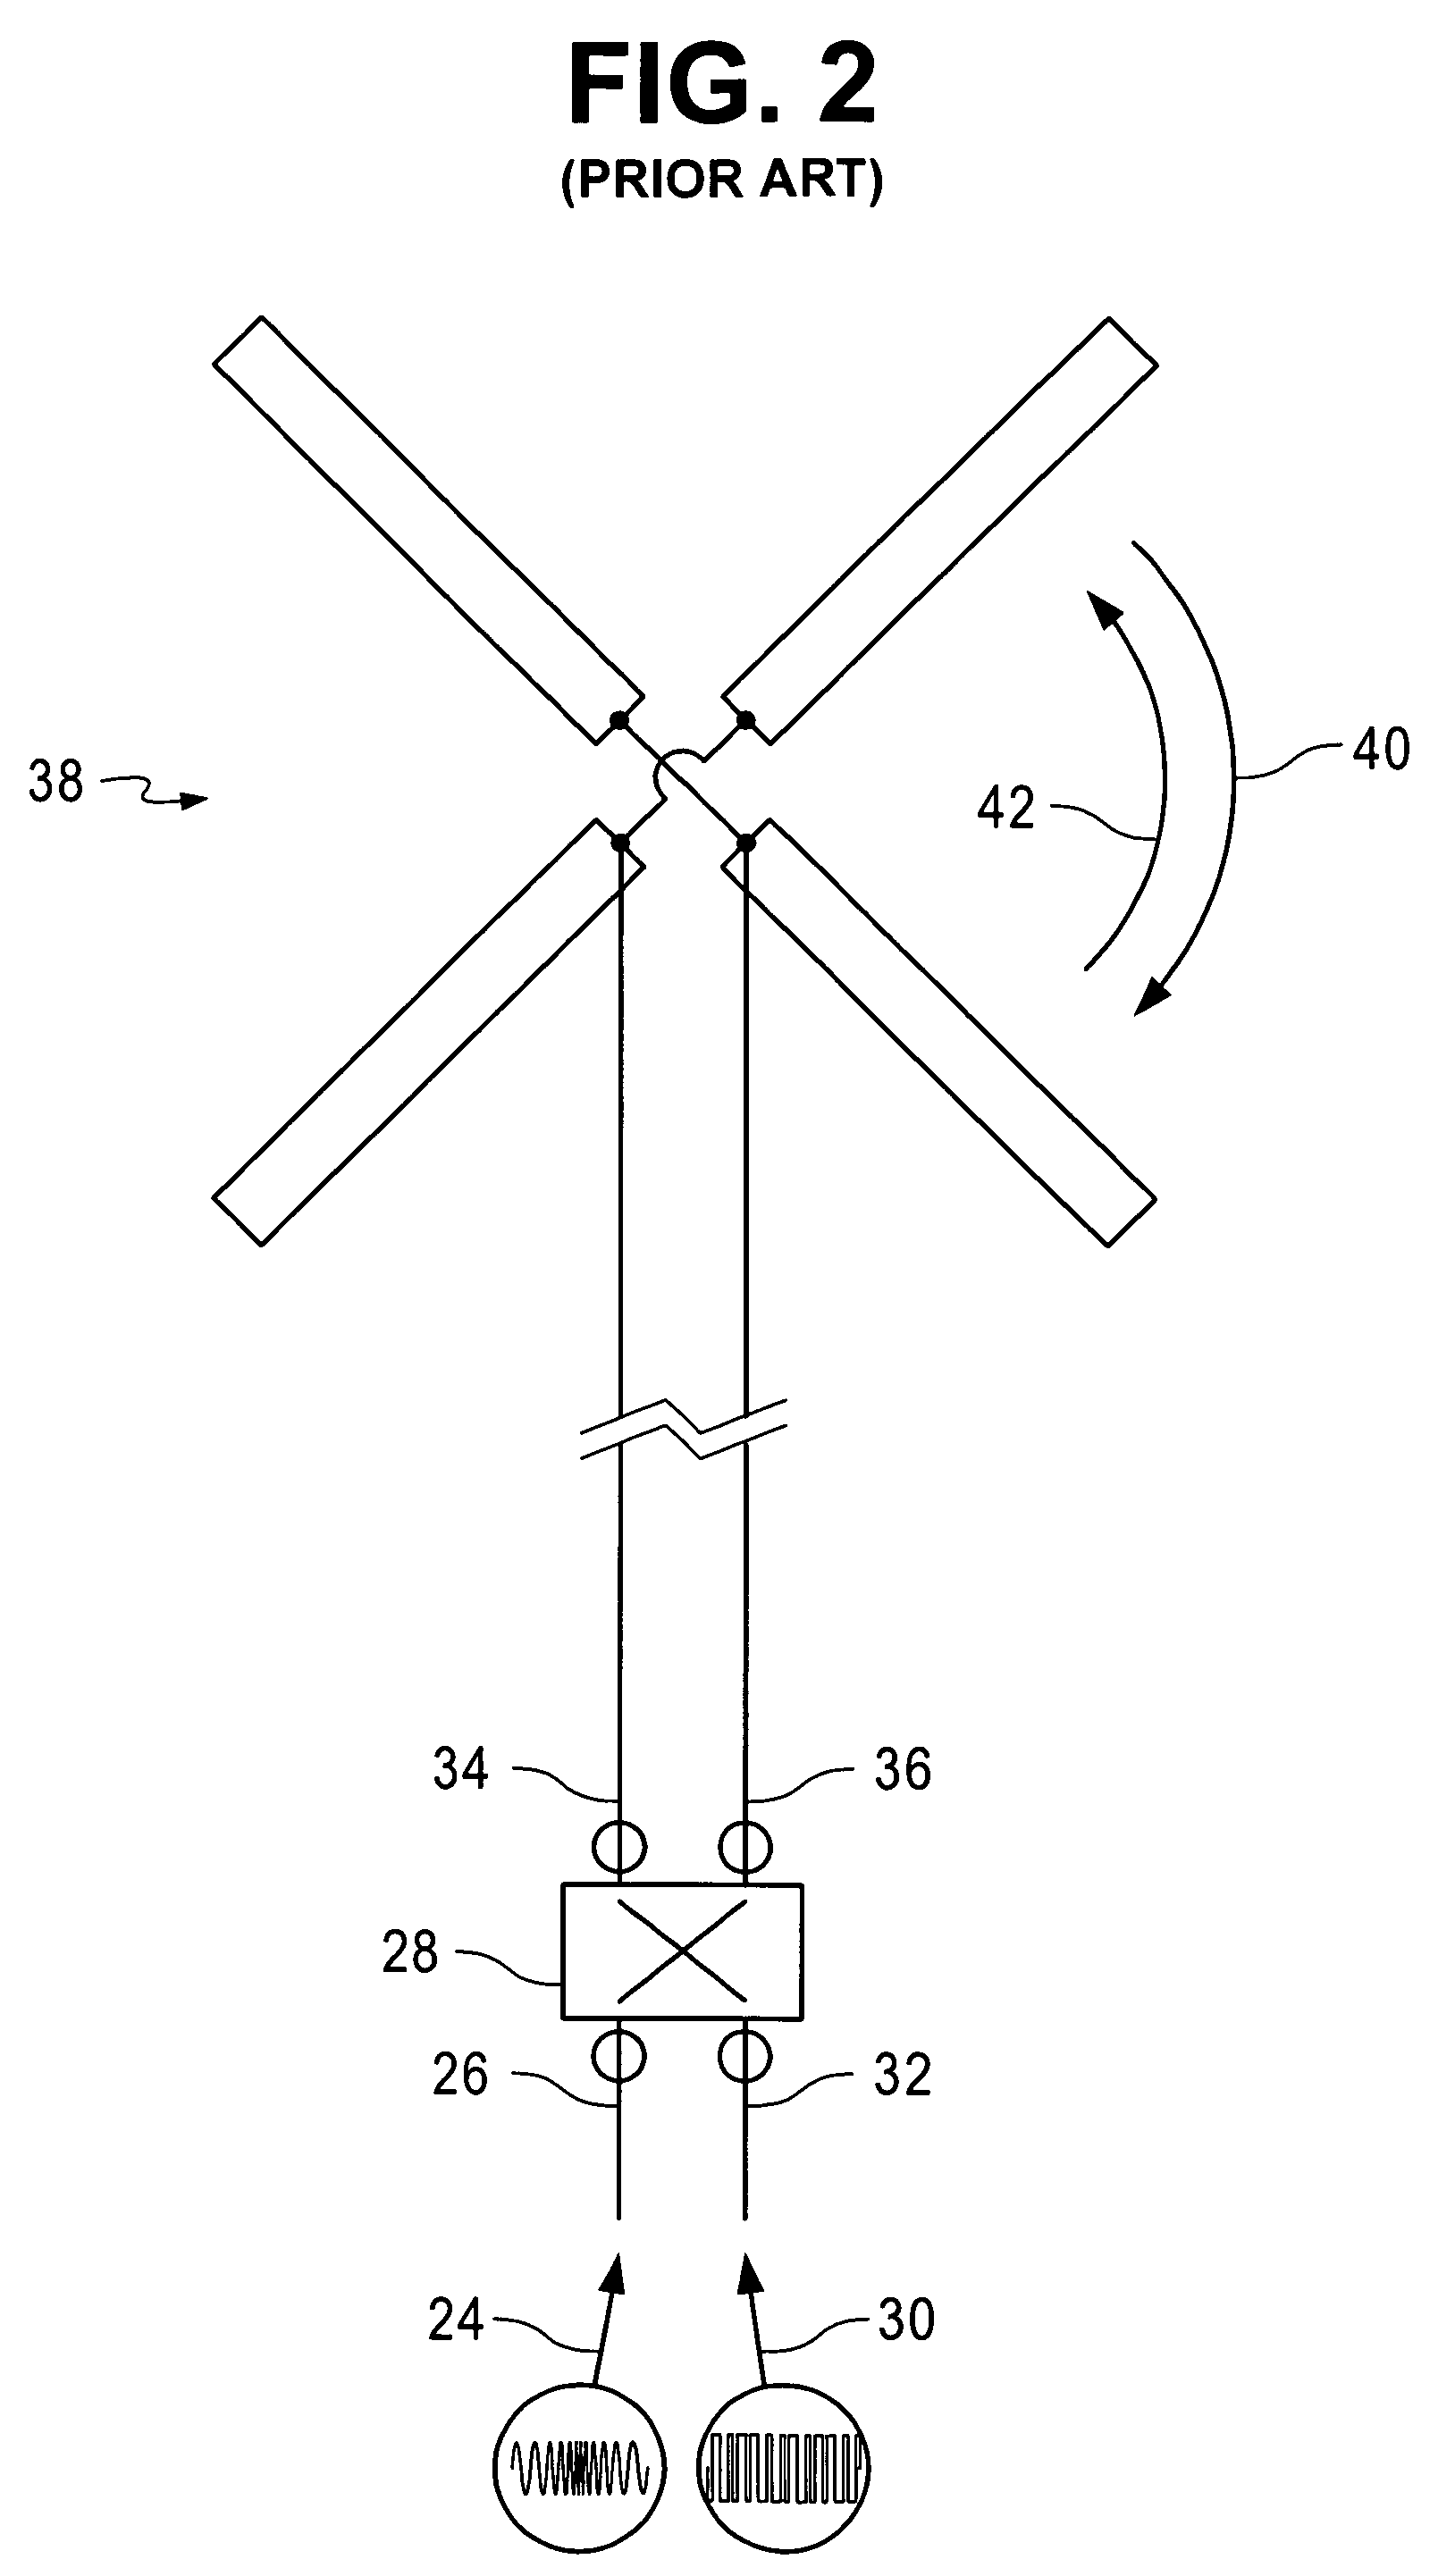 Antenna system and method to transmit cross-polarized signals from a common radiator with low mutual coupling